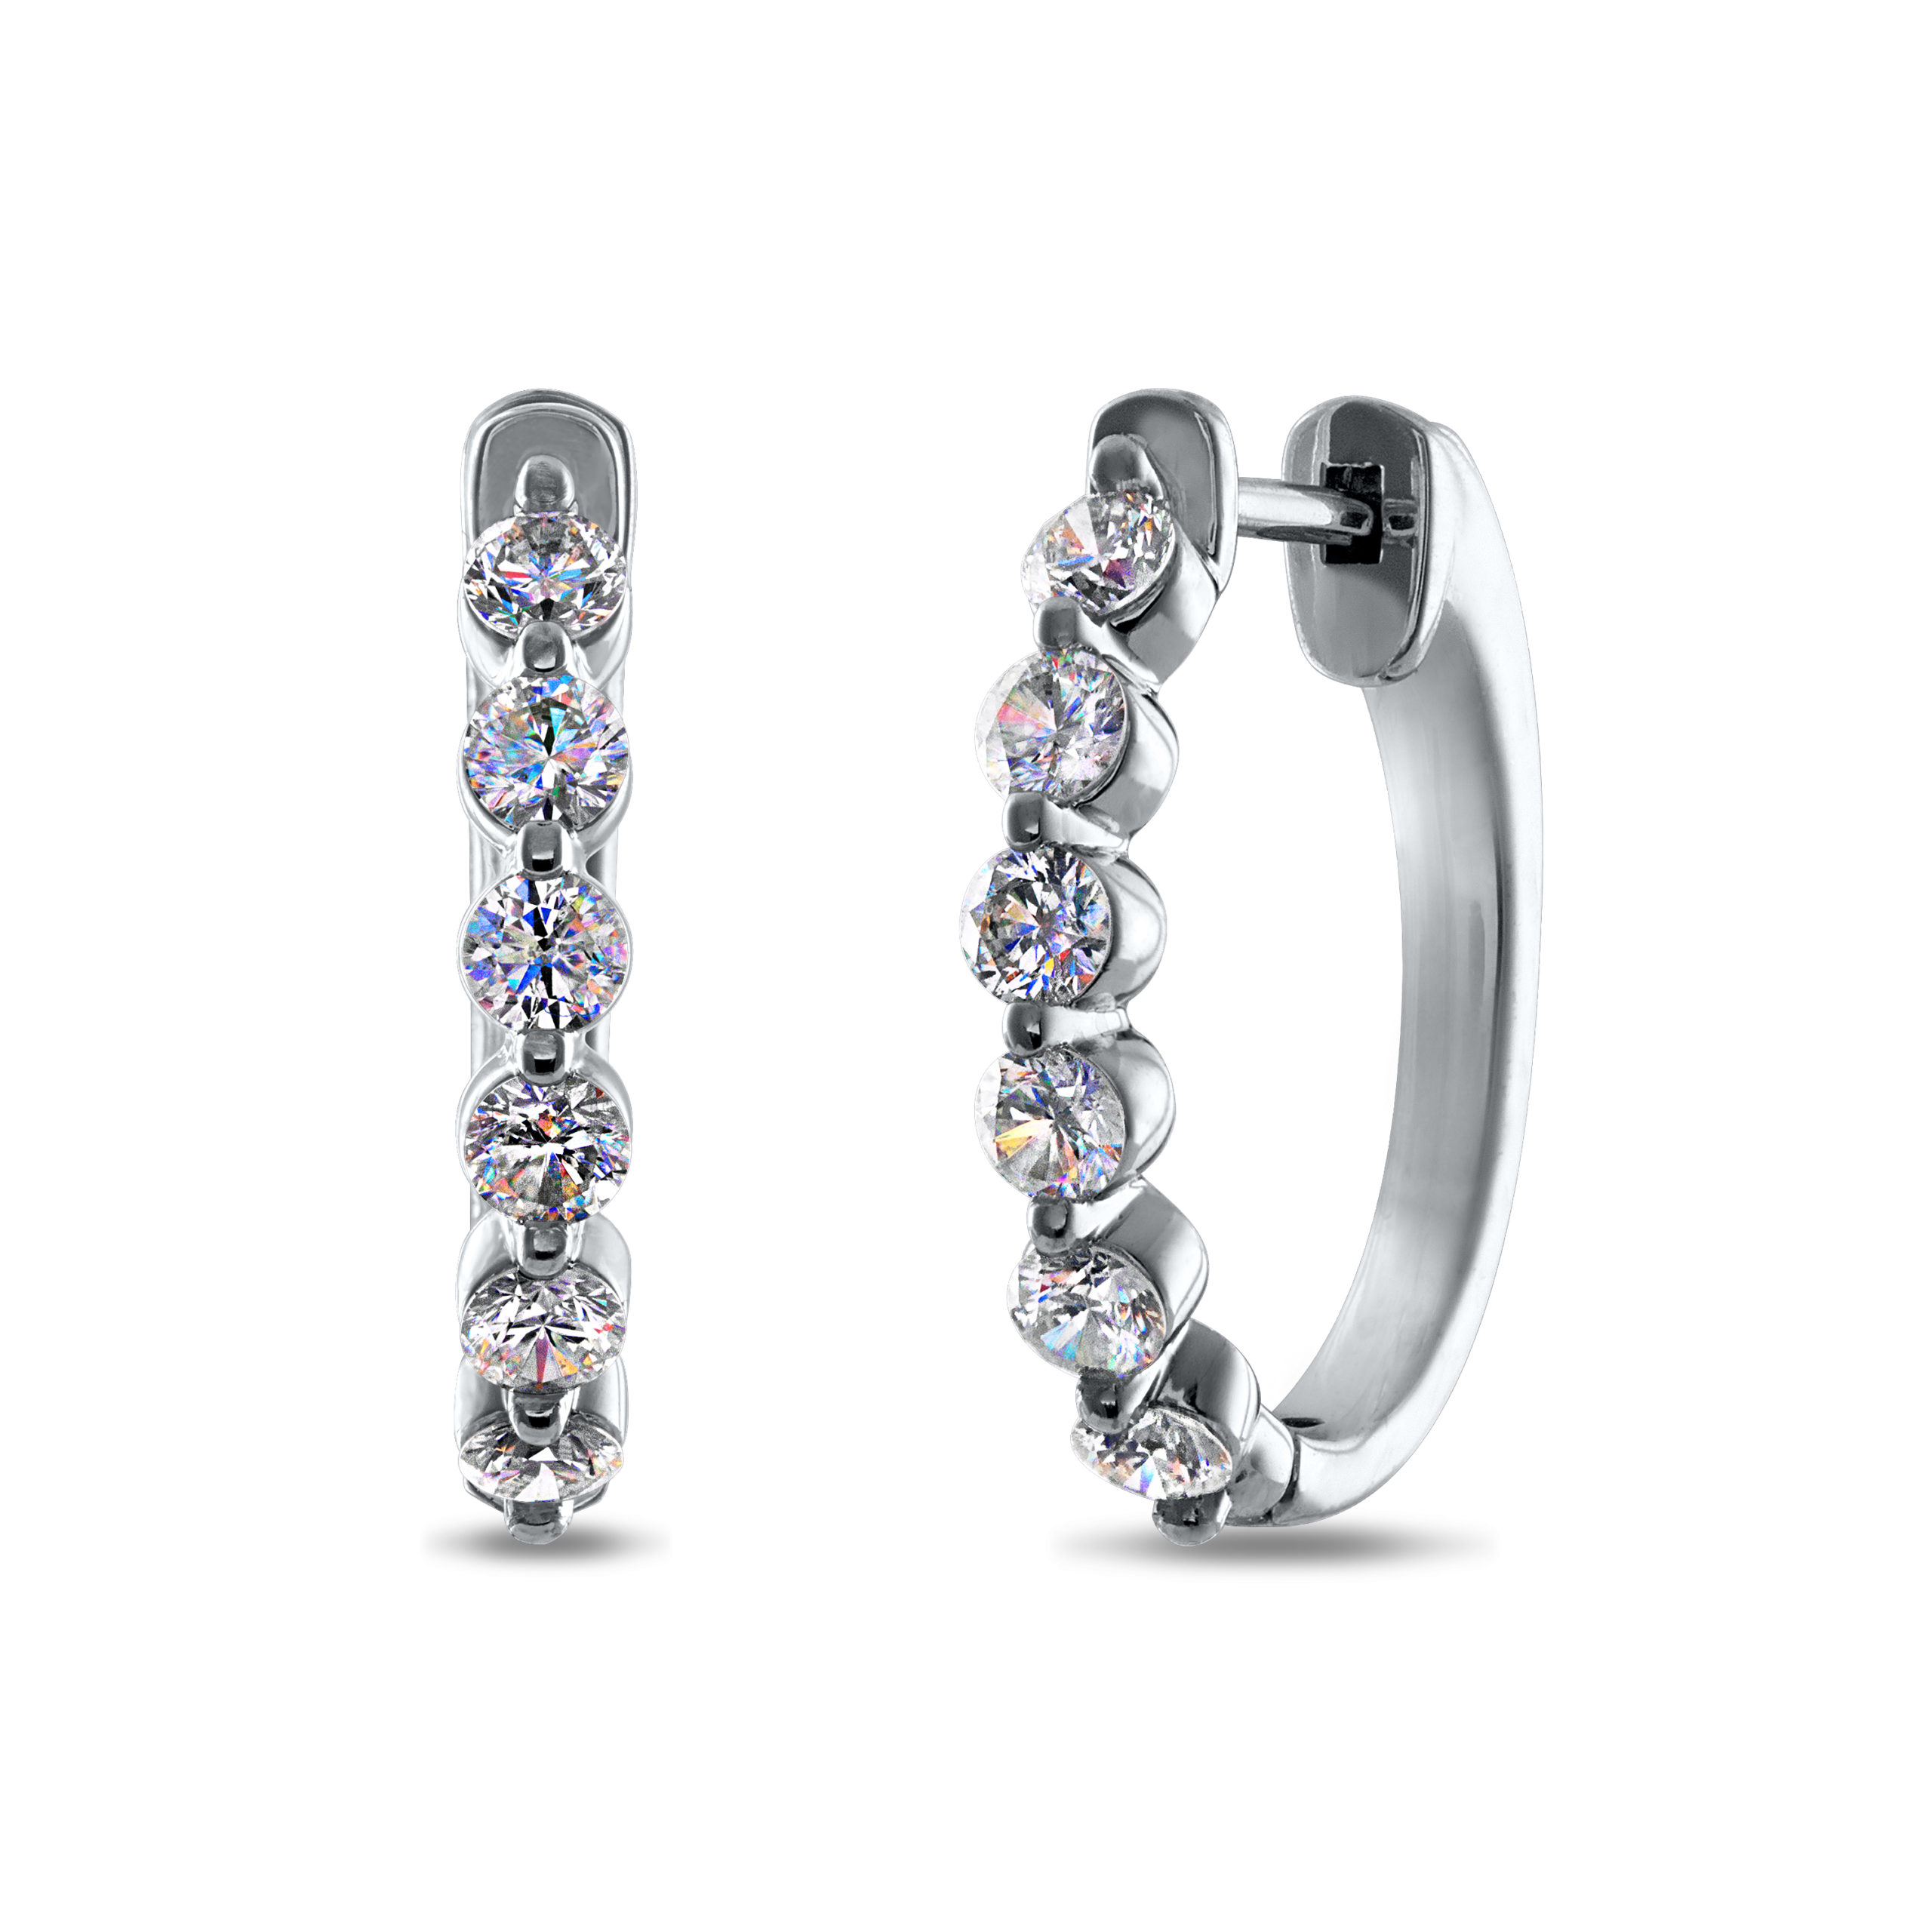 Facets of Fire Round Hoop Single Prong Diamond Earrings